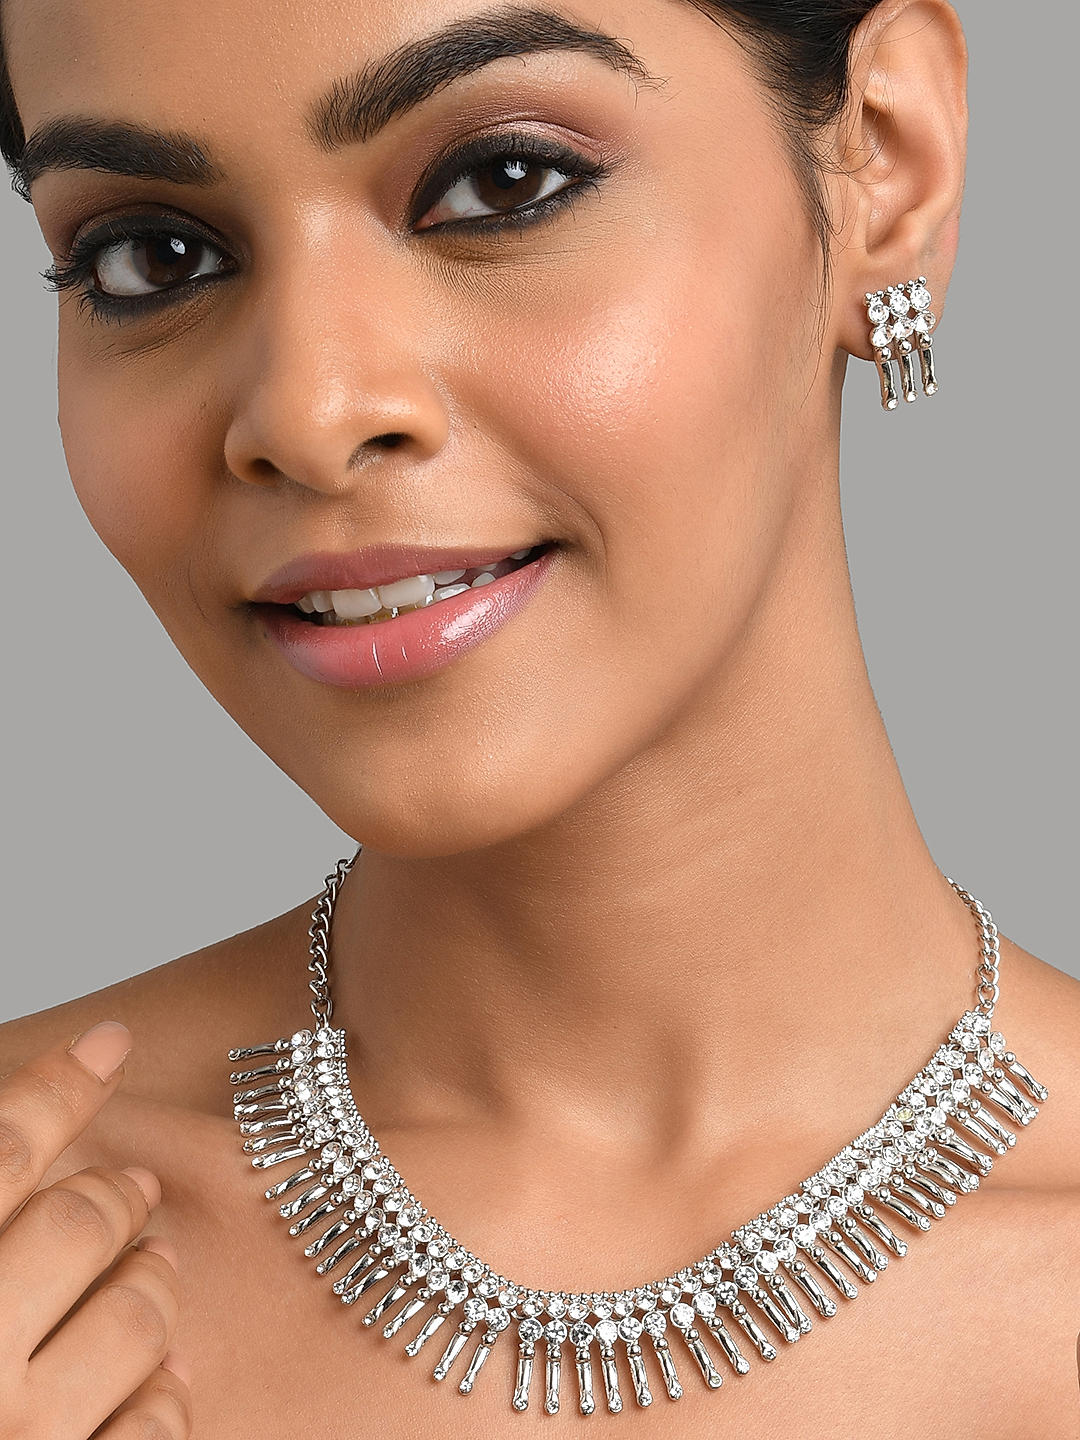 Rubans Silver Plated Elegant Necklace Set With American Diamonds.